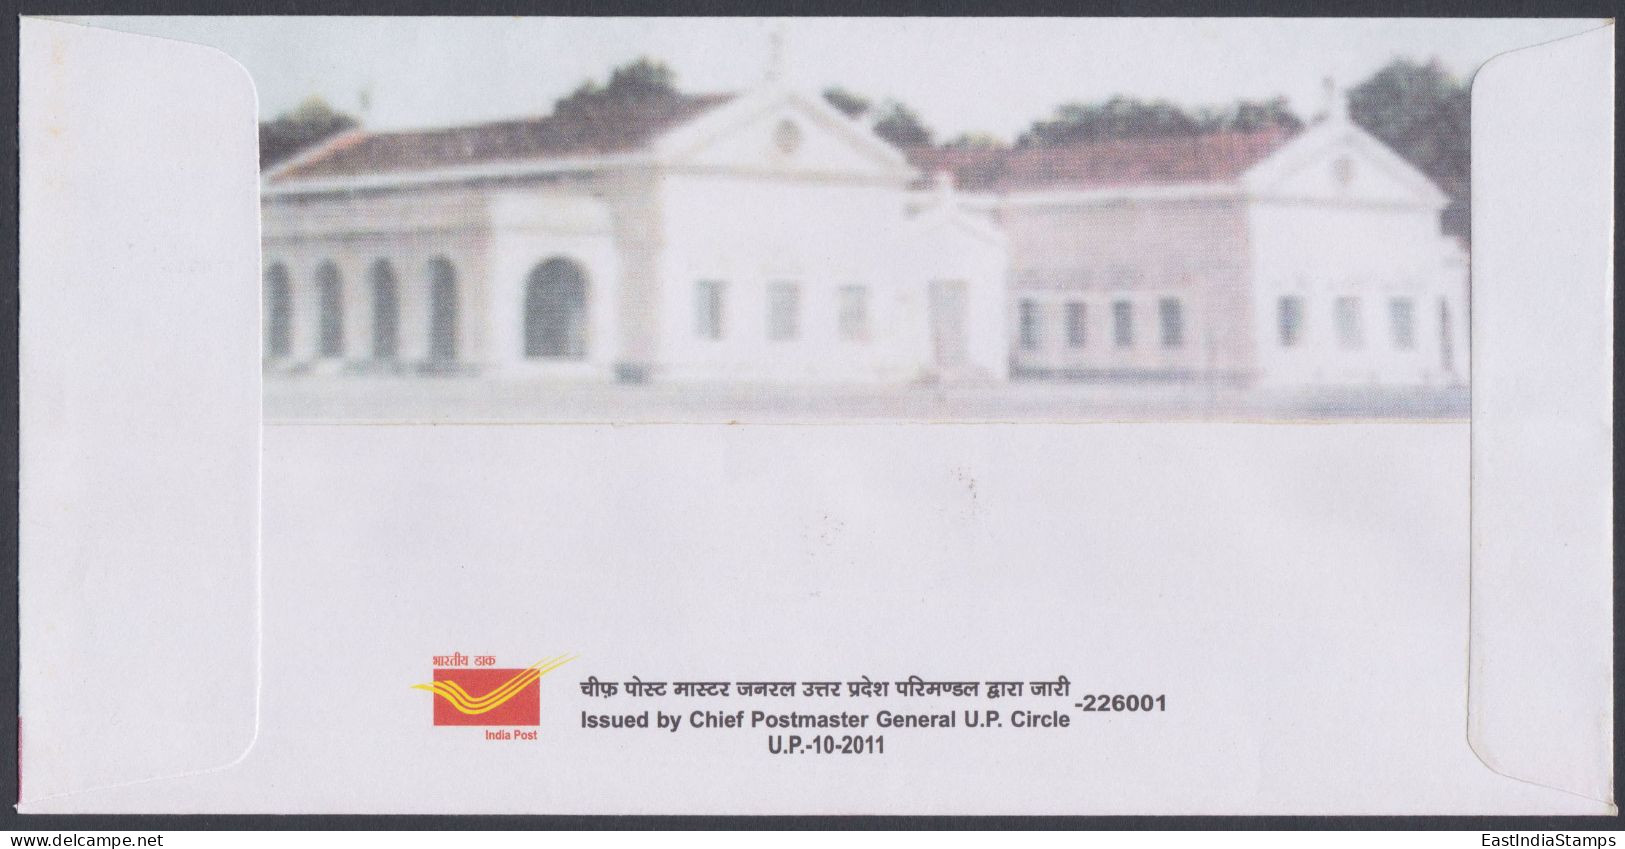 Inde India 2011 Special Cover Boys' High School & College, Allahabad, Education, Convent, Christian, Pictorial Postmark - Lettres & Documents